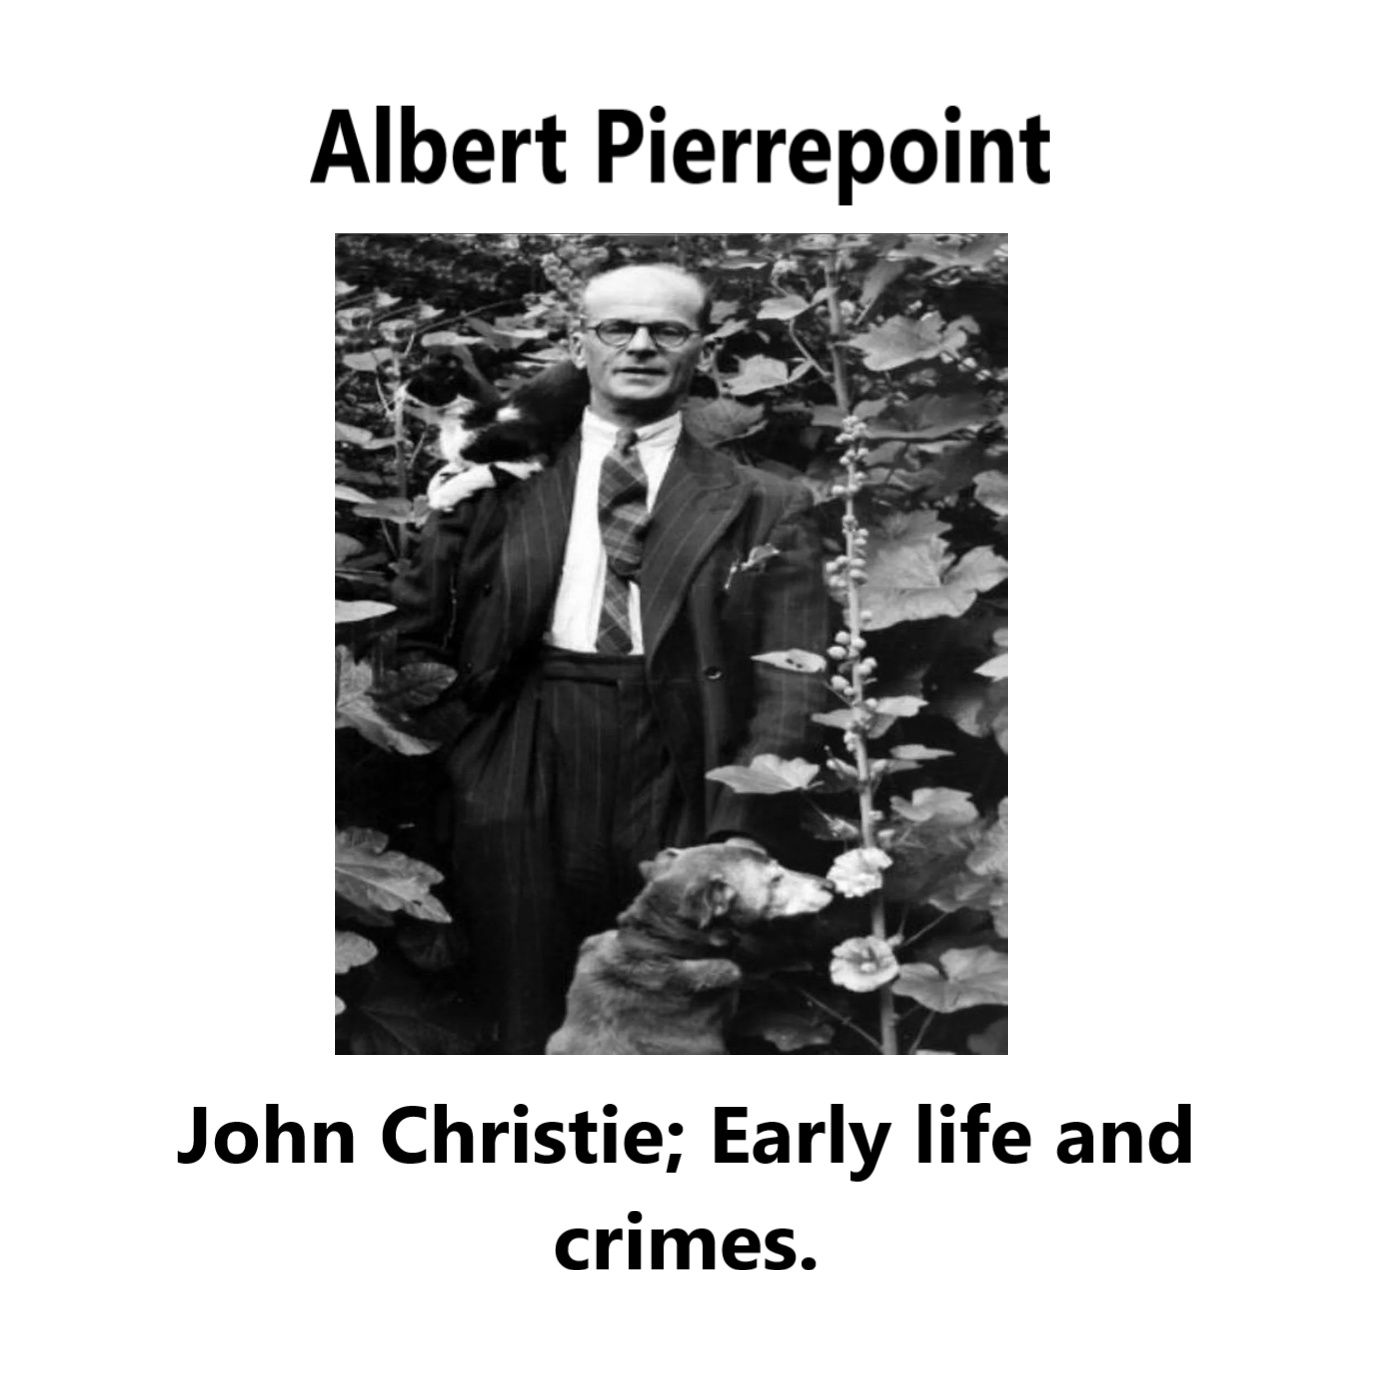 Albert Pierrepoint: The Early life and crimes of John Christie